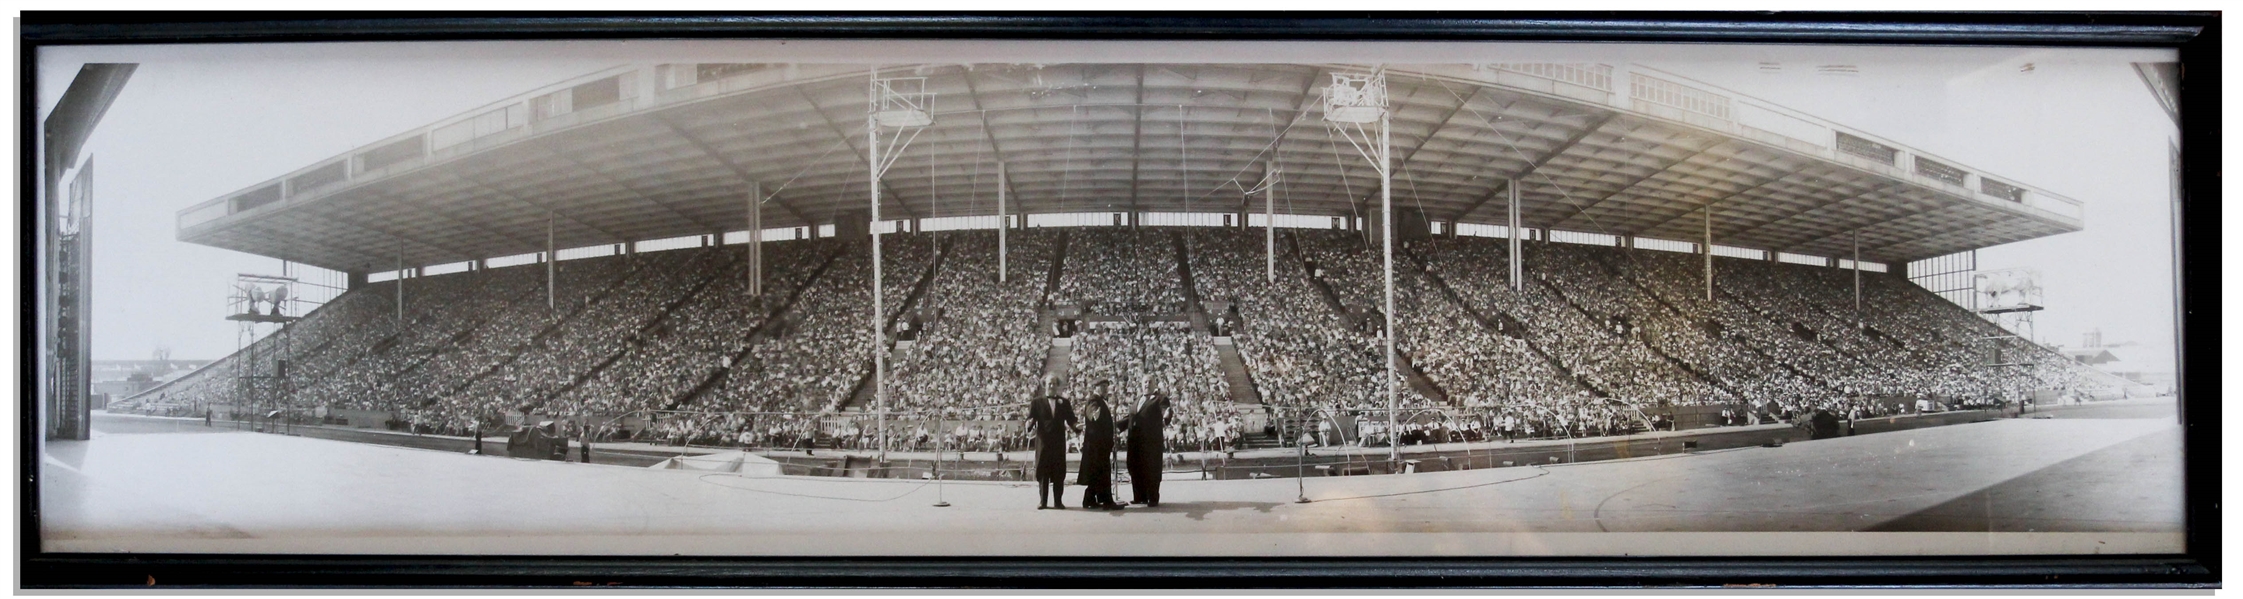 31.5'' x 8.25'' Panoramic Photo That Hung in Moe's Office of The Three Stooges Performing at the Canadian National Exposition on August 19, 1963 -- Some Wear to Frame, Overall Very Good Plus Condition